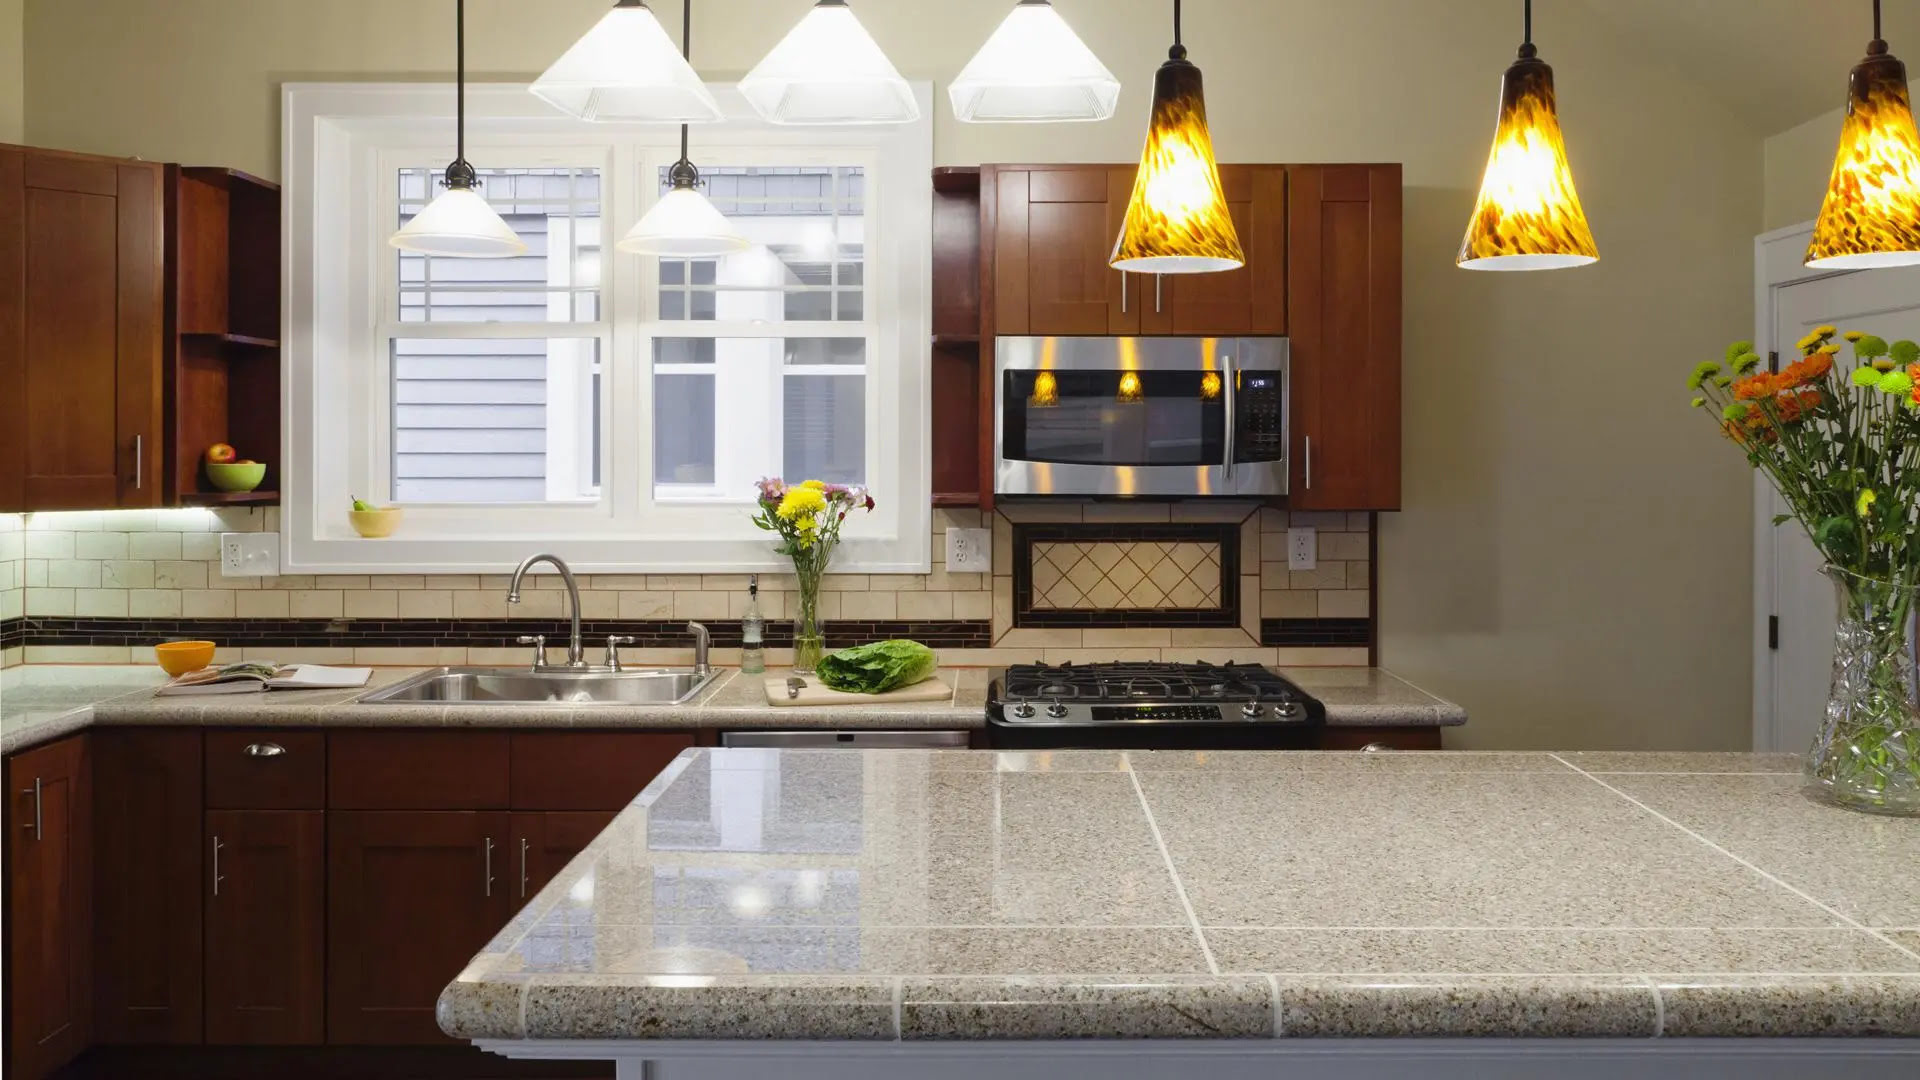 How To Tile Countertops: With Top Tips From The Experts